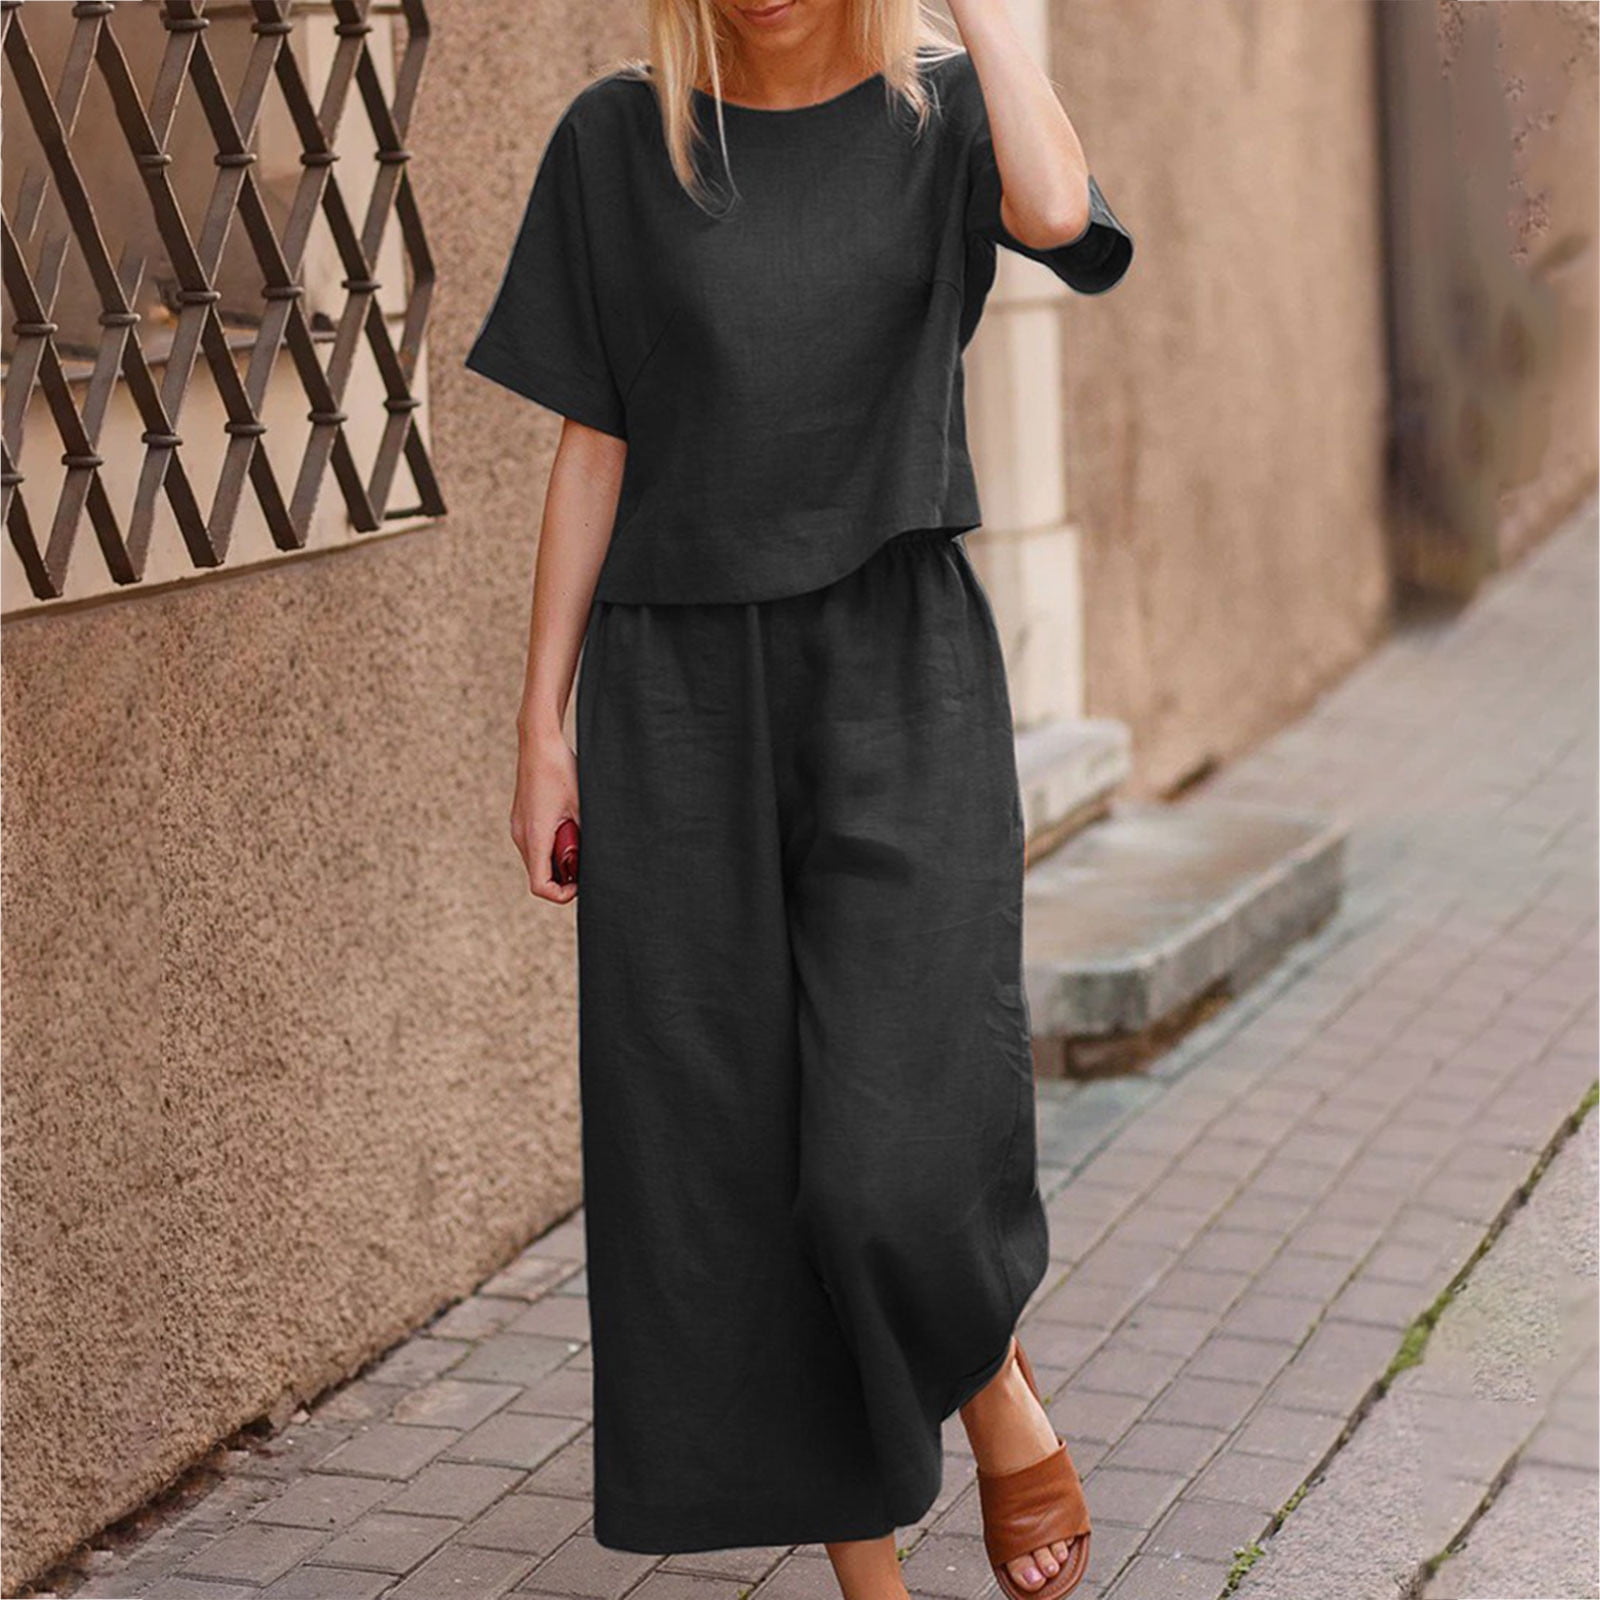 Xysaqa Summer 2 Piece Elegant Outfits for Women Casual Short Sleeve Shirts  + Wide Leg Cropped Linen Pants Tracksuit Set 